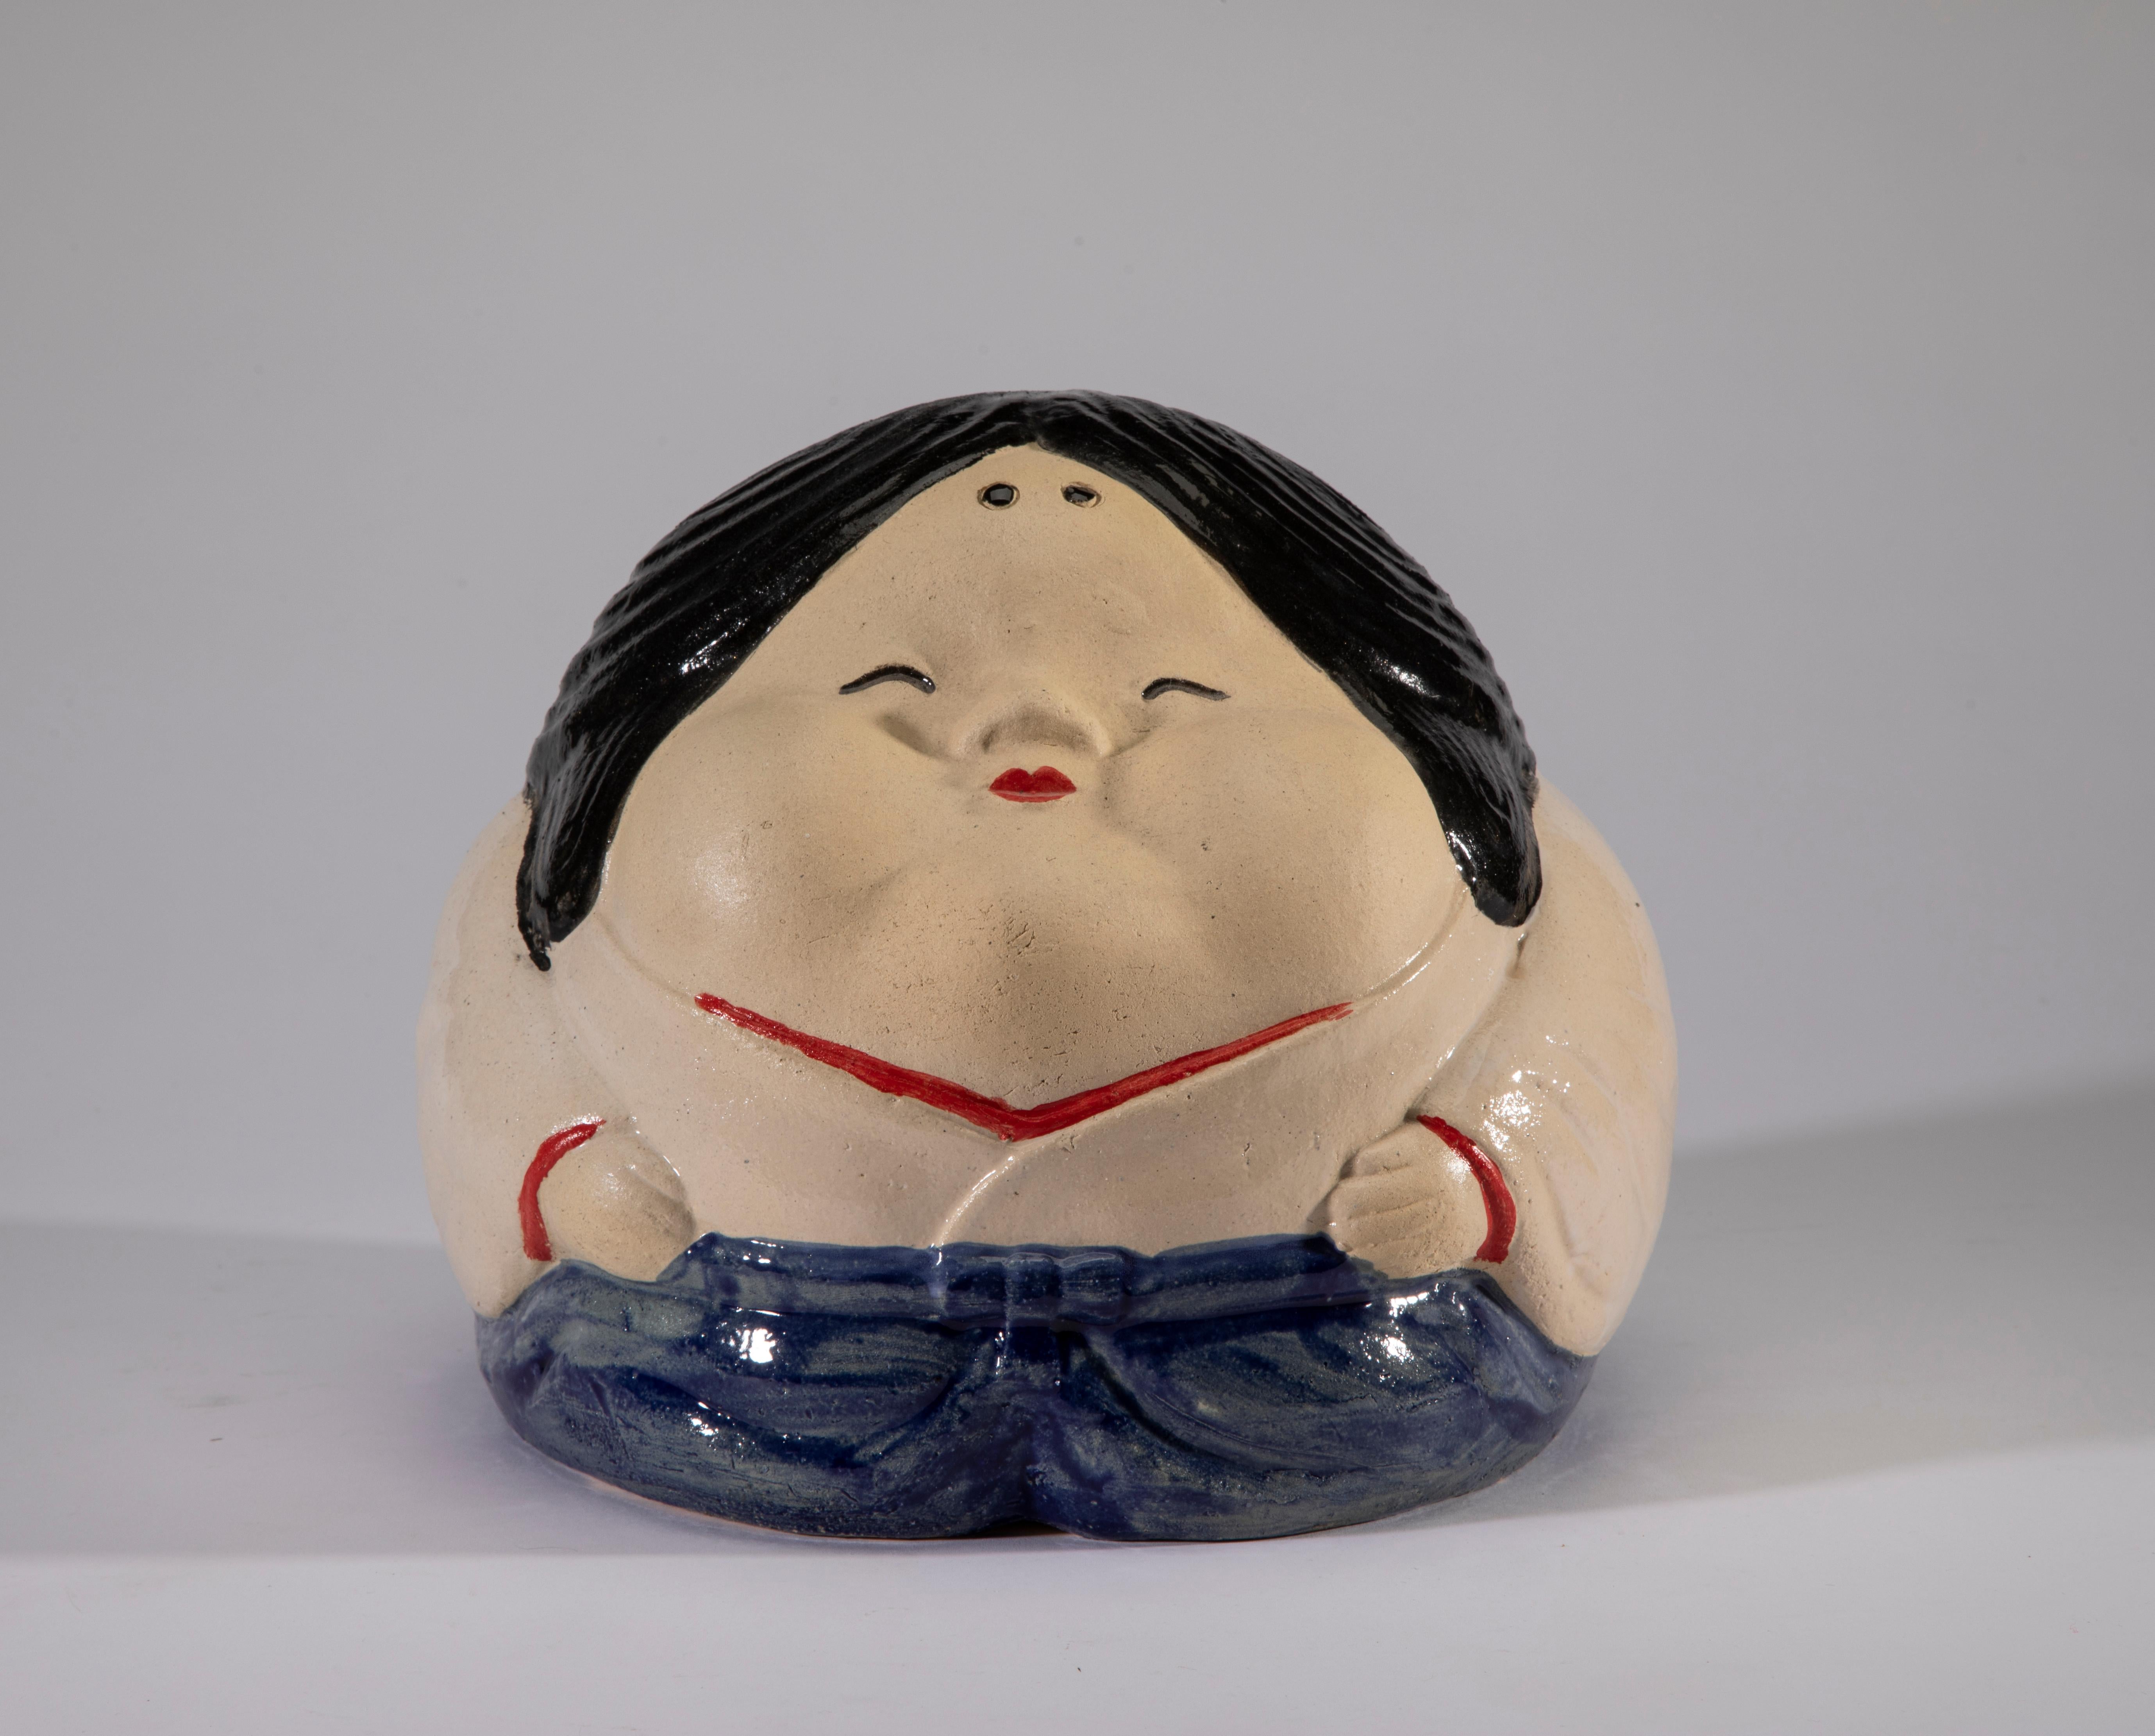 Otafuku - So, what is Not To Love About a Smile Like This ? ! 

Meet Otafuku ! She is known for her Generosity, Kindness, and Goodwill in Japan. 

She is a mythical figure who is much loved and her face is on many items.

Her smile will greet